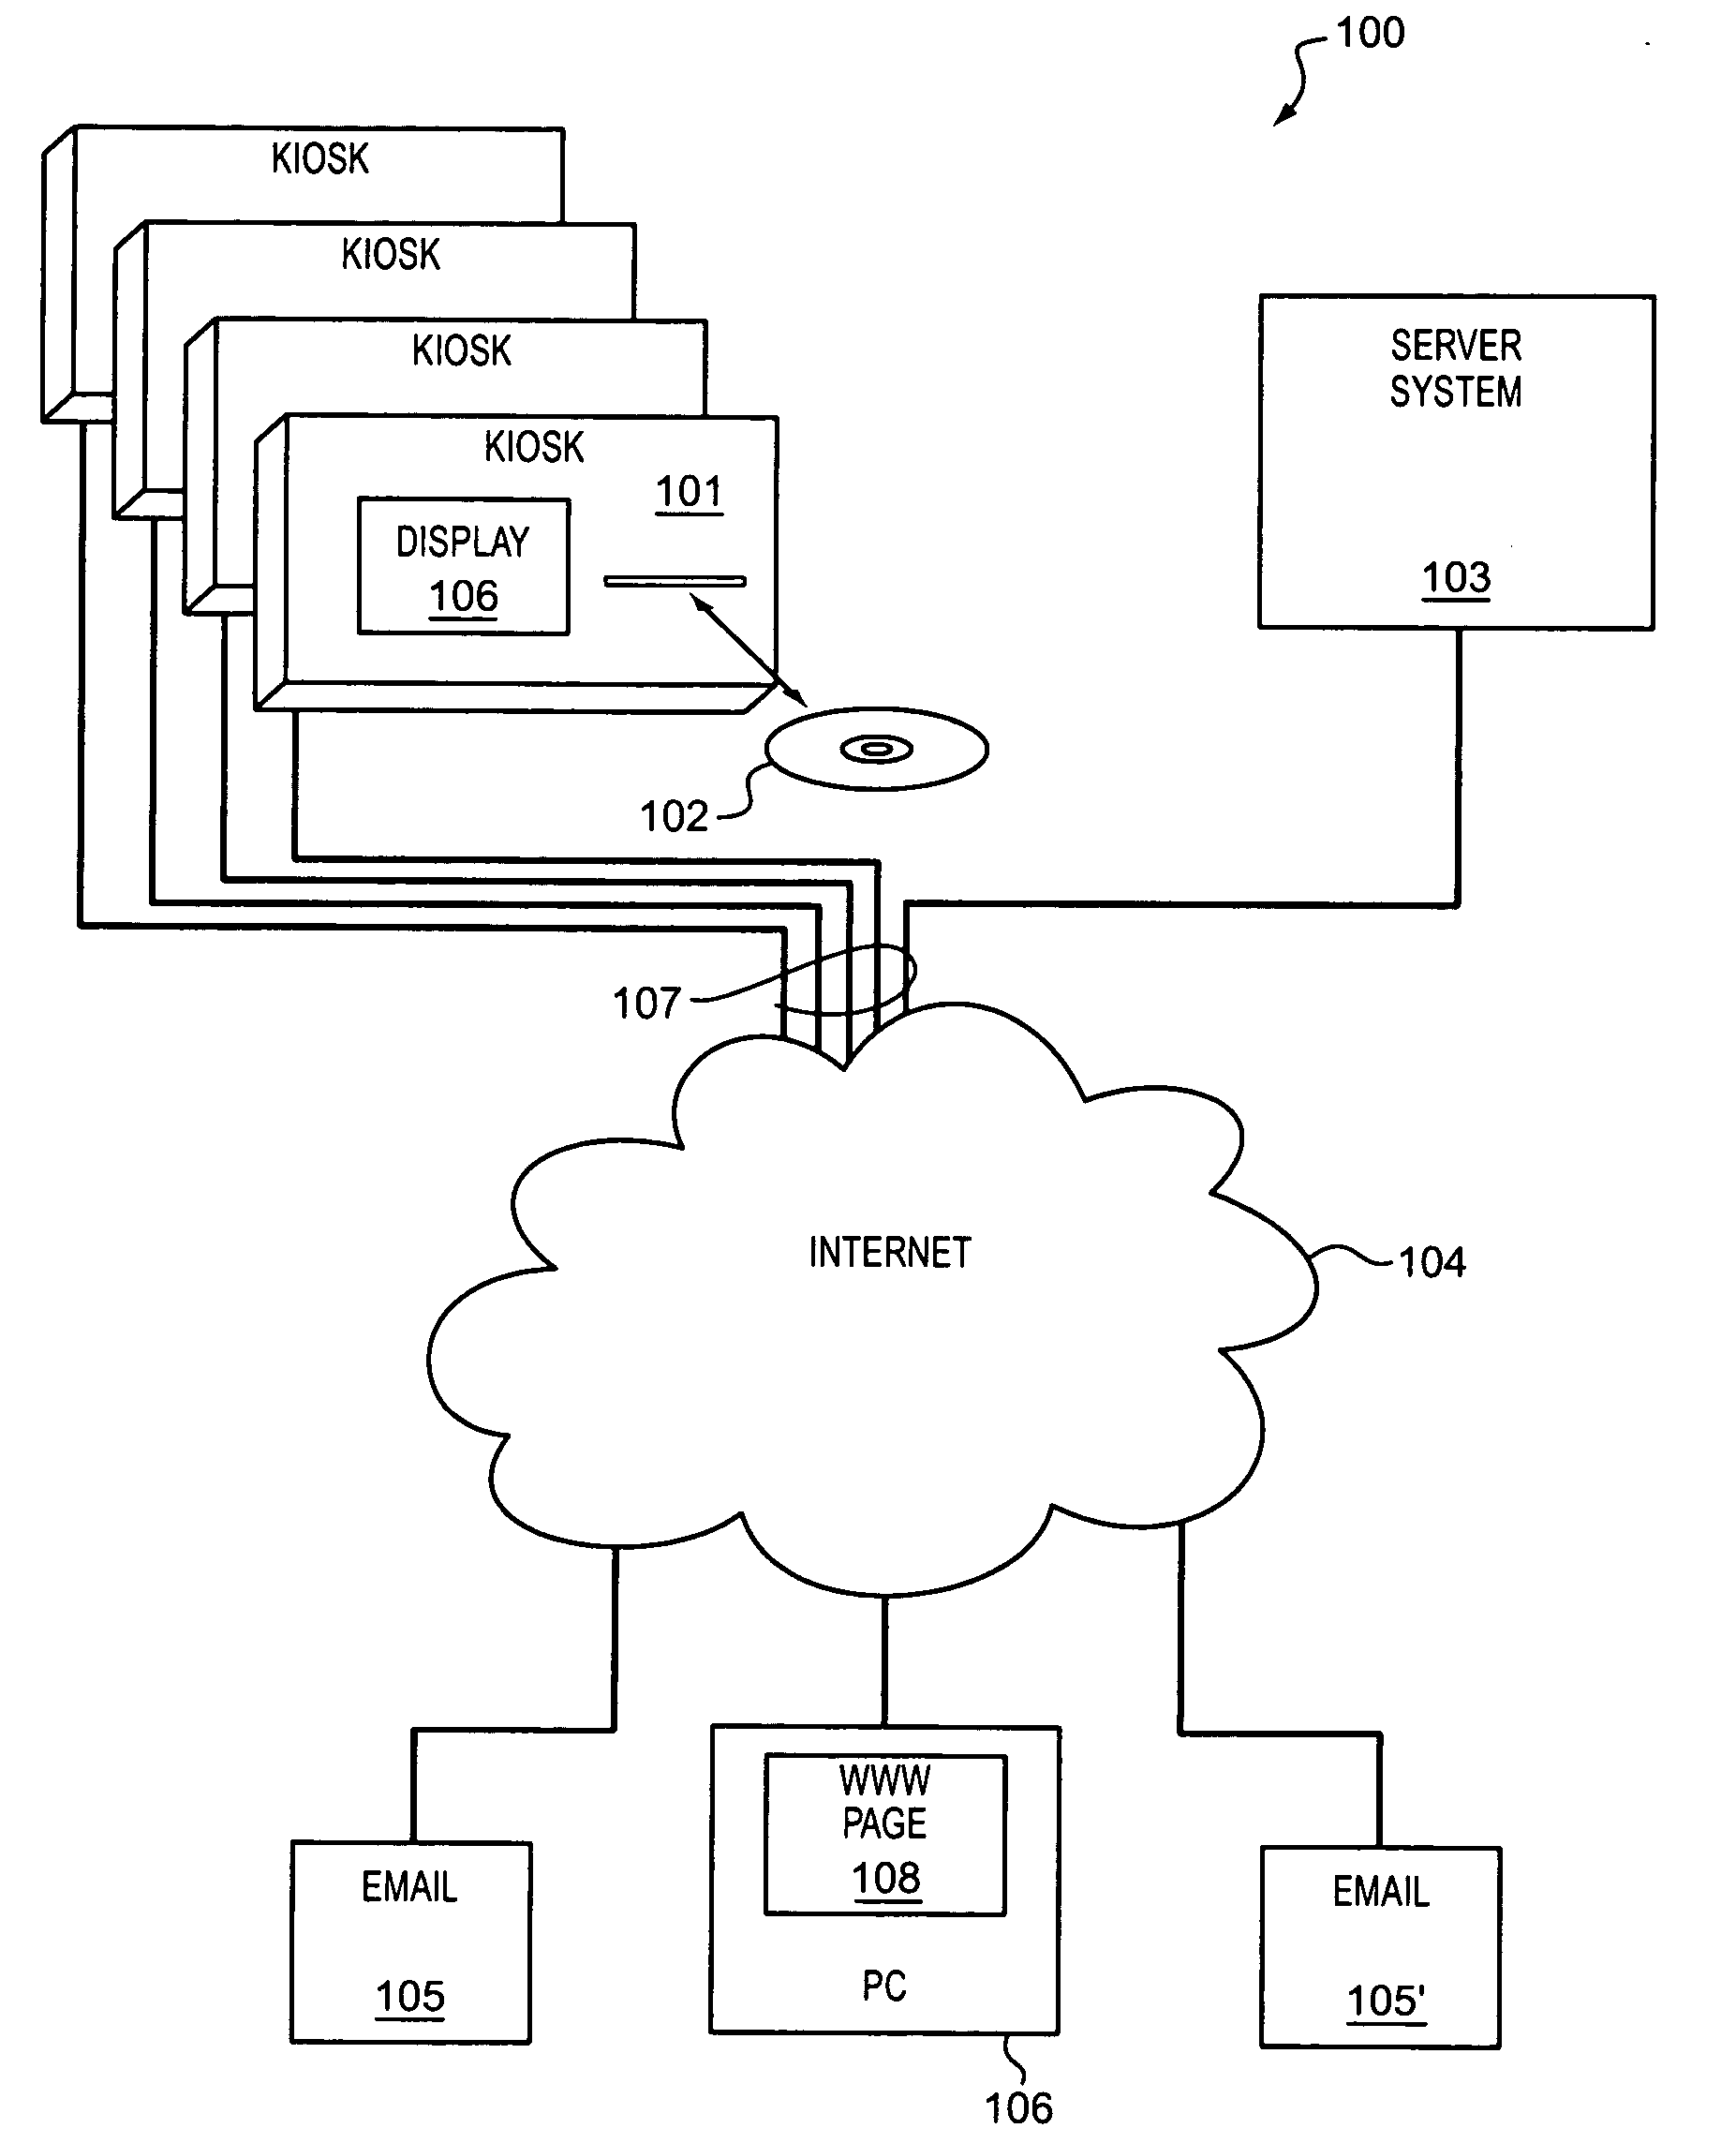 System and kiosk for commerce of optical media through multiple locations